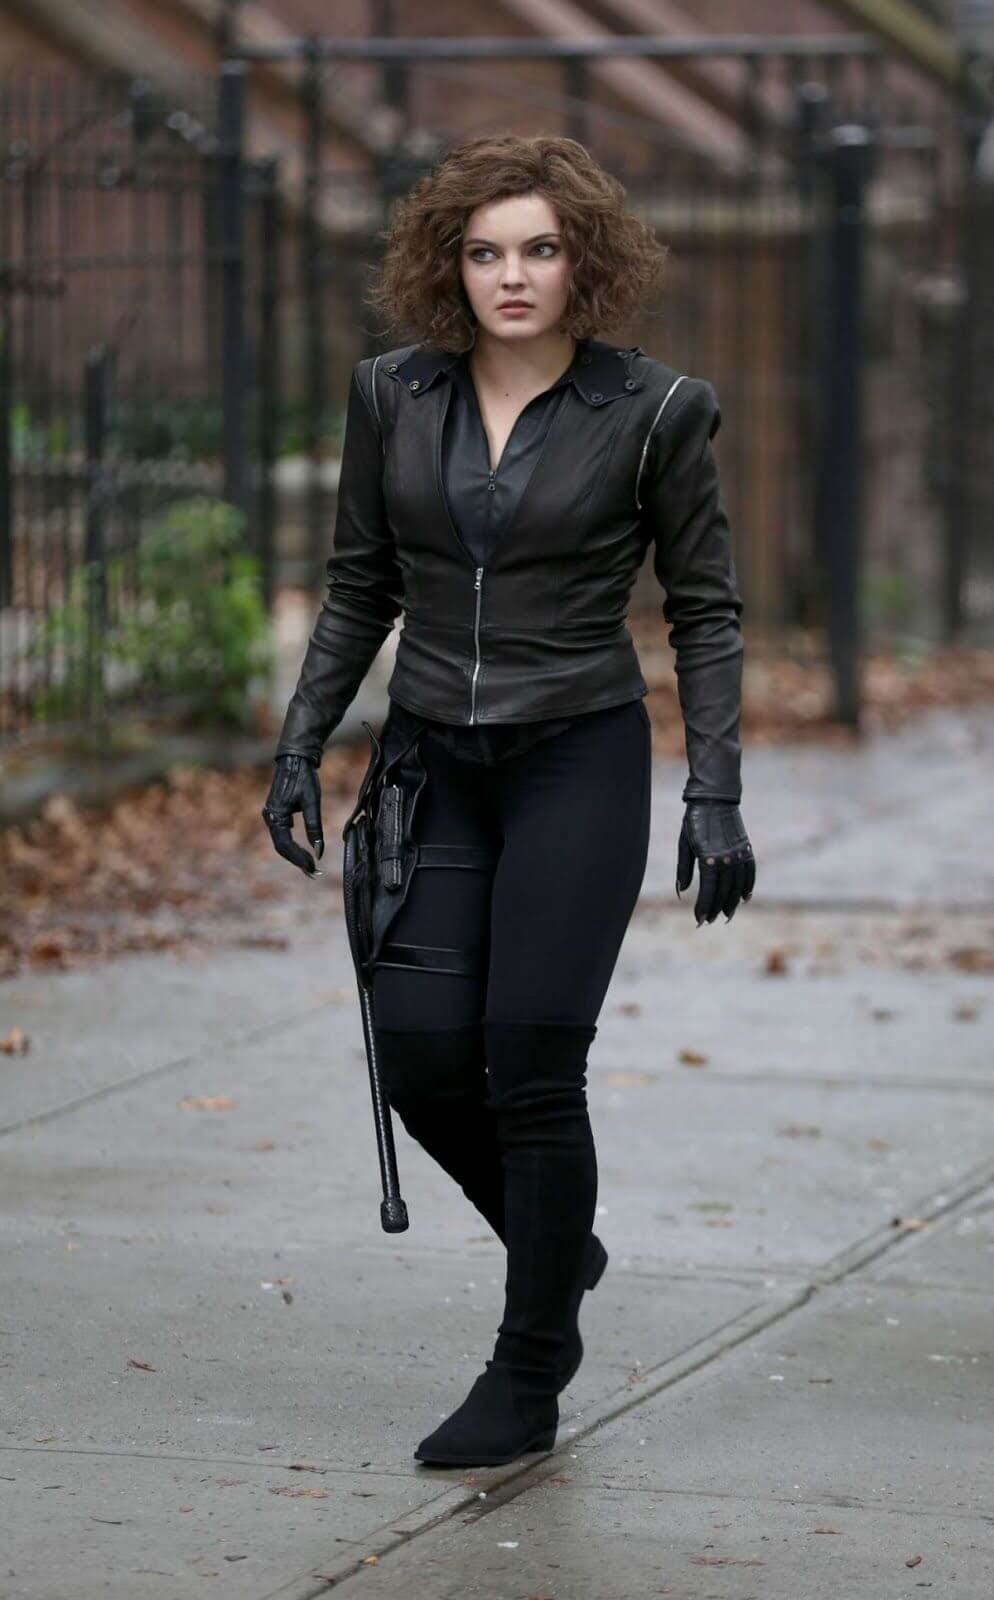 Camren Bicondova awesome picture